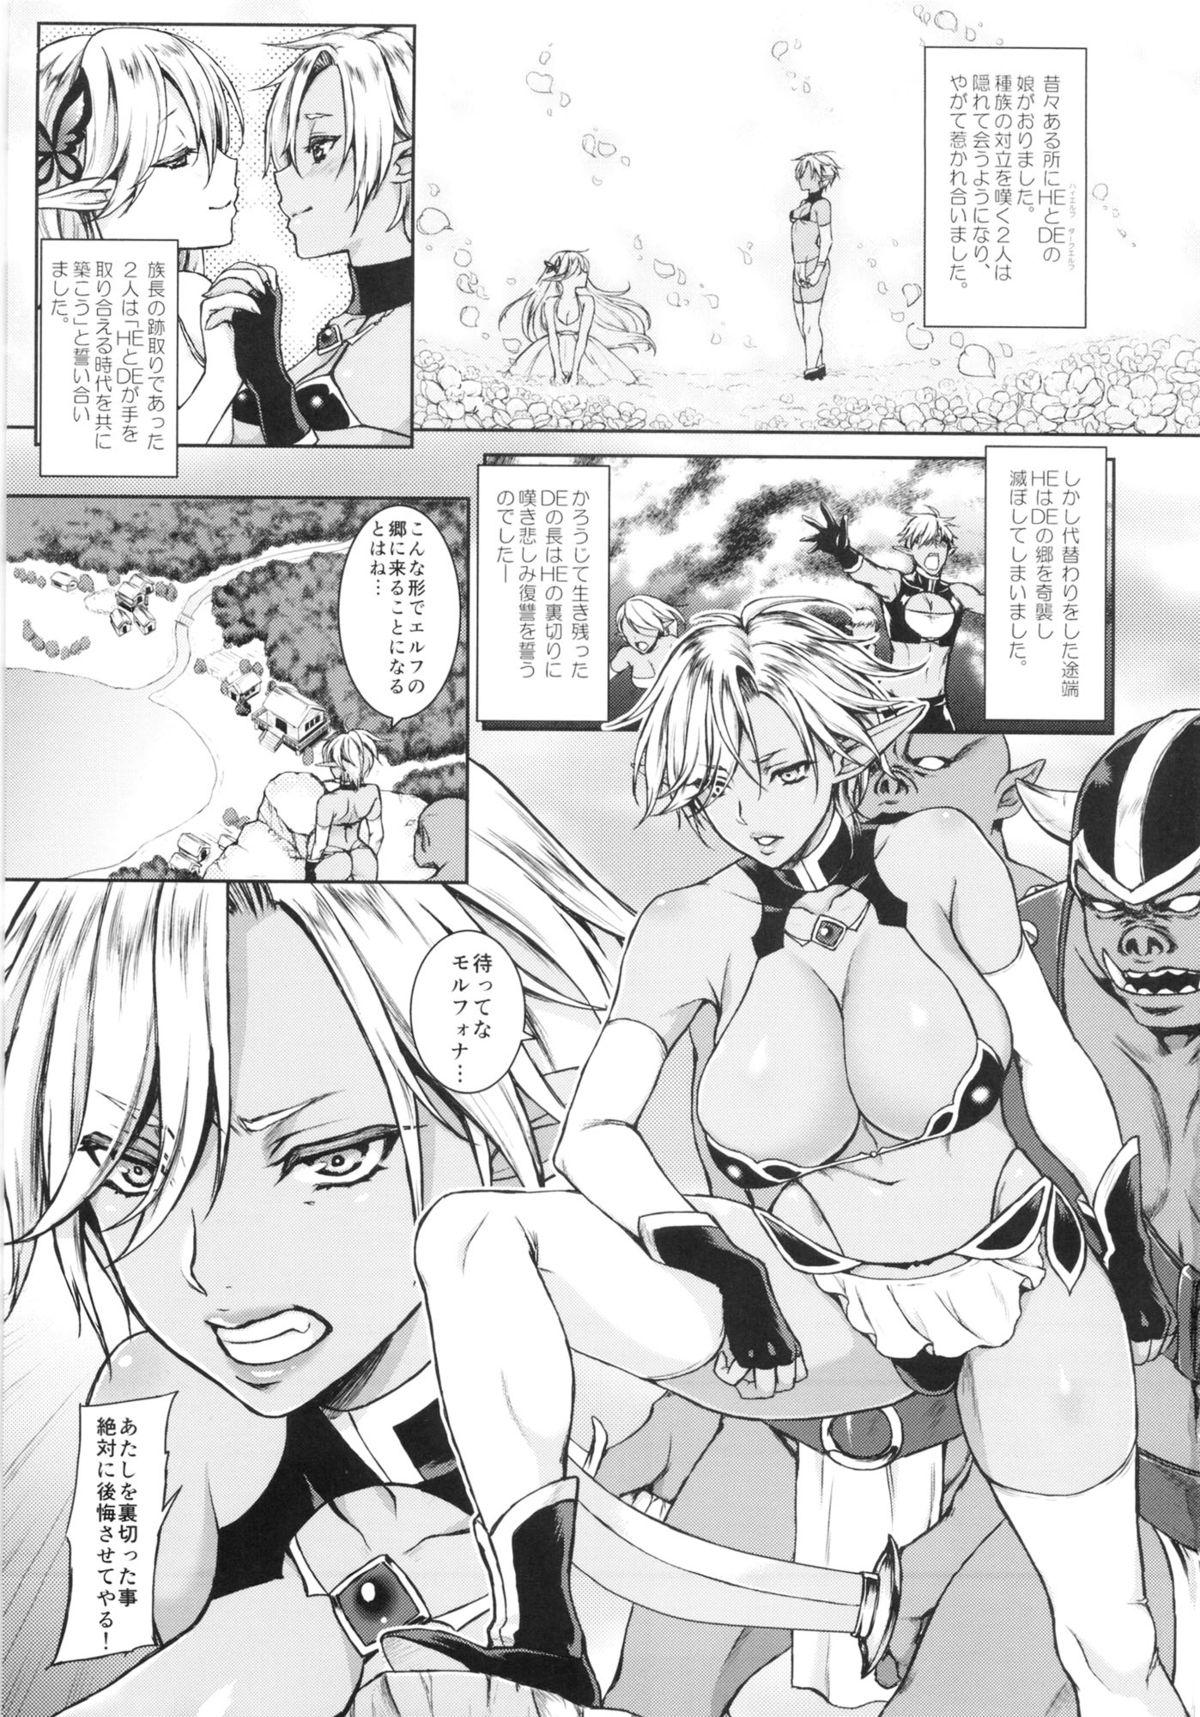 Tanned Kyouchou no Yume - The dream of mad morpho butterflies. Moreno - Page 2